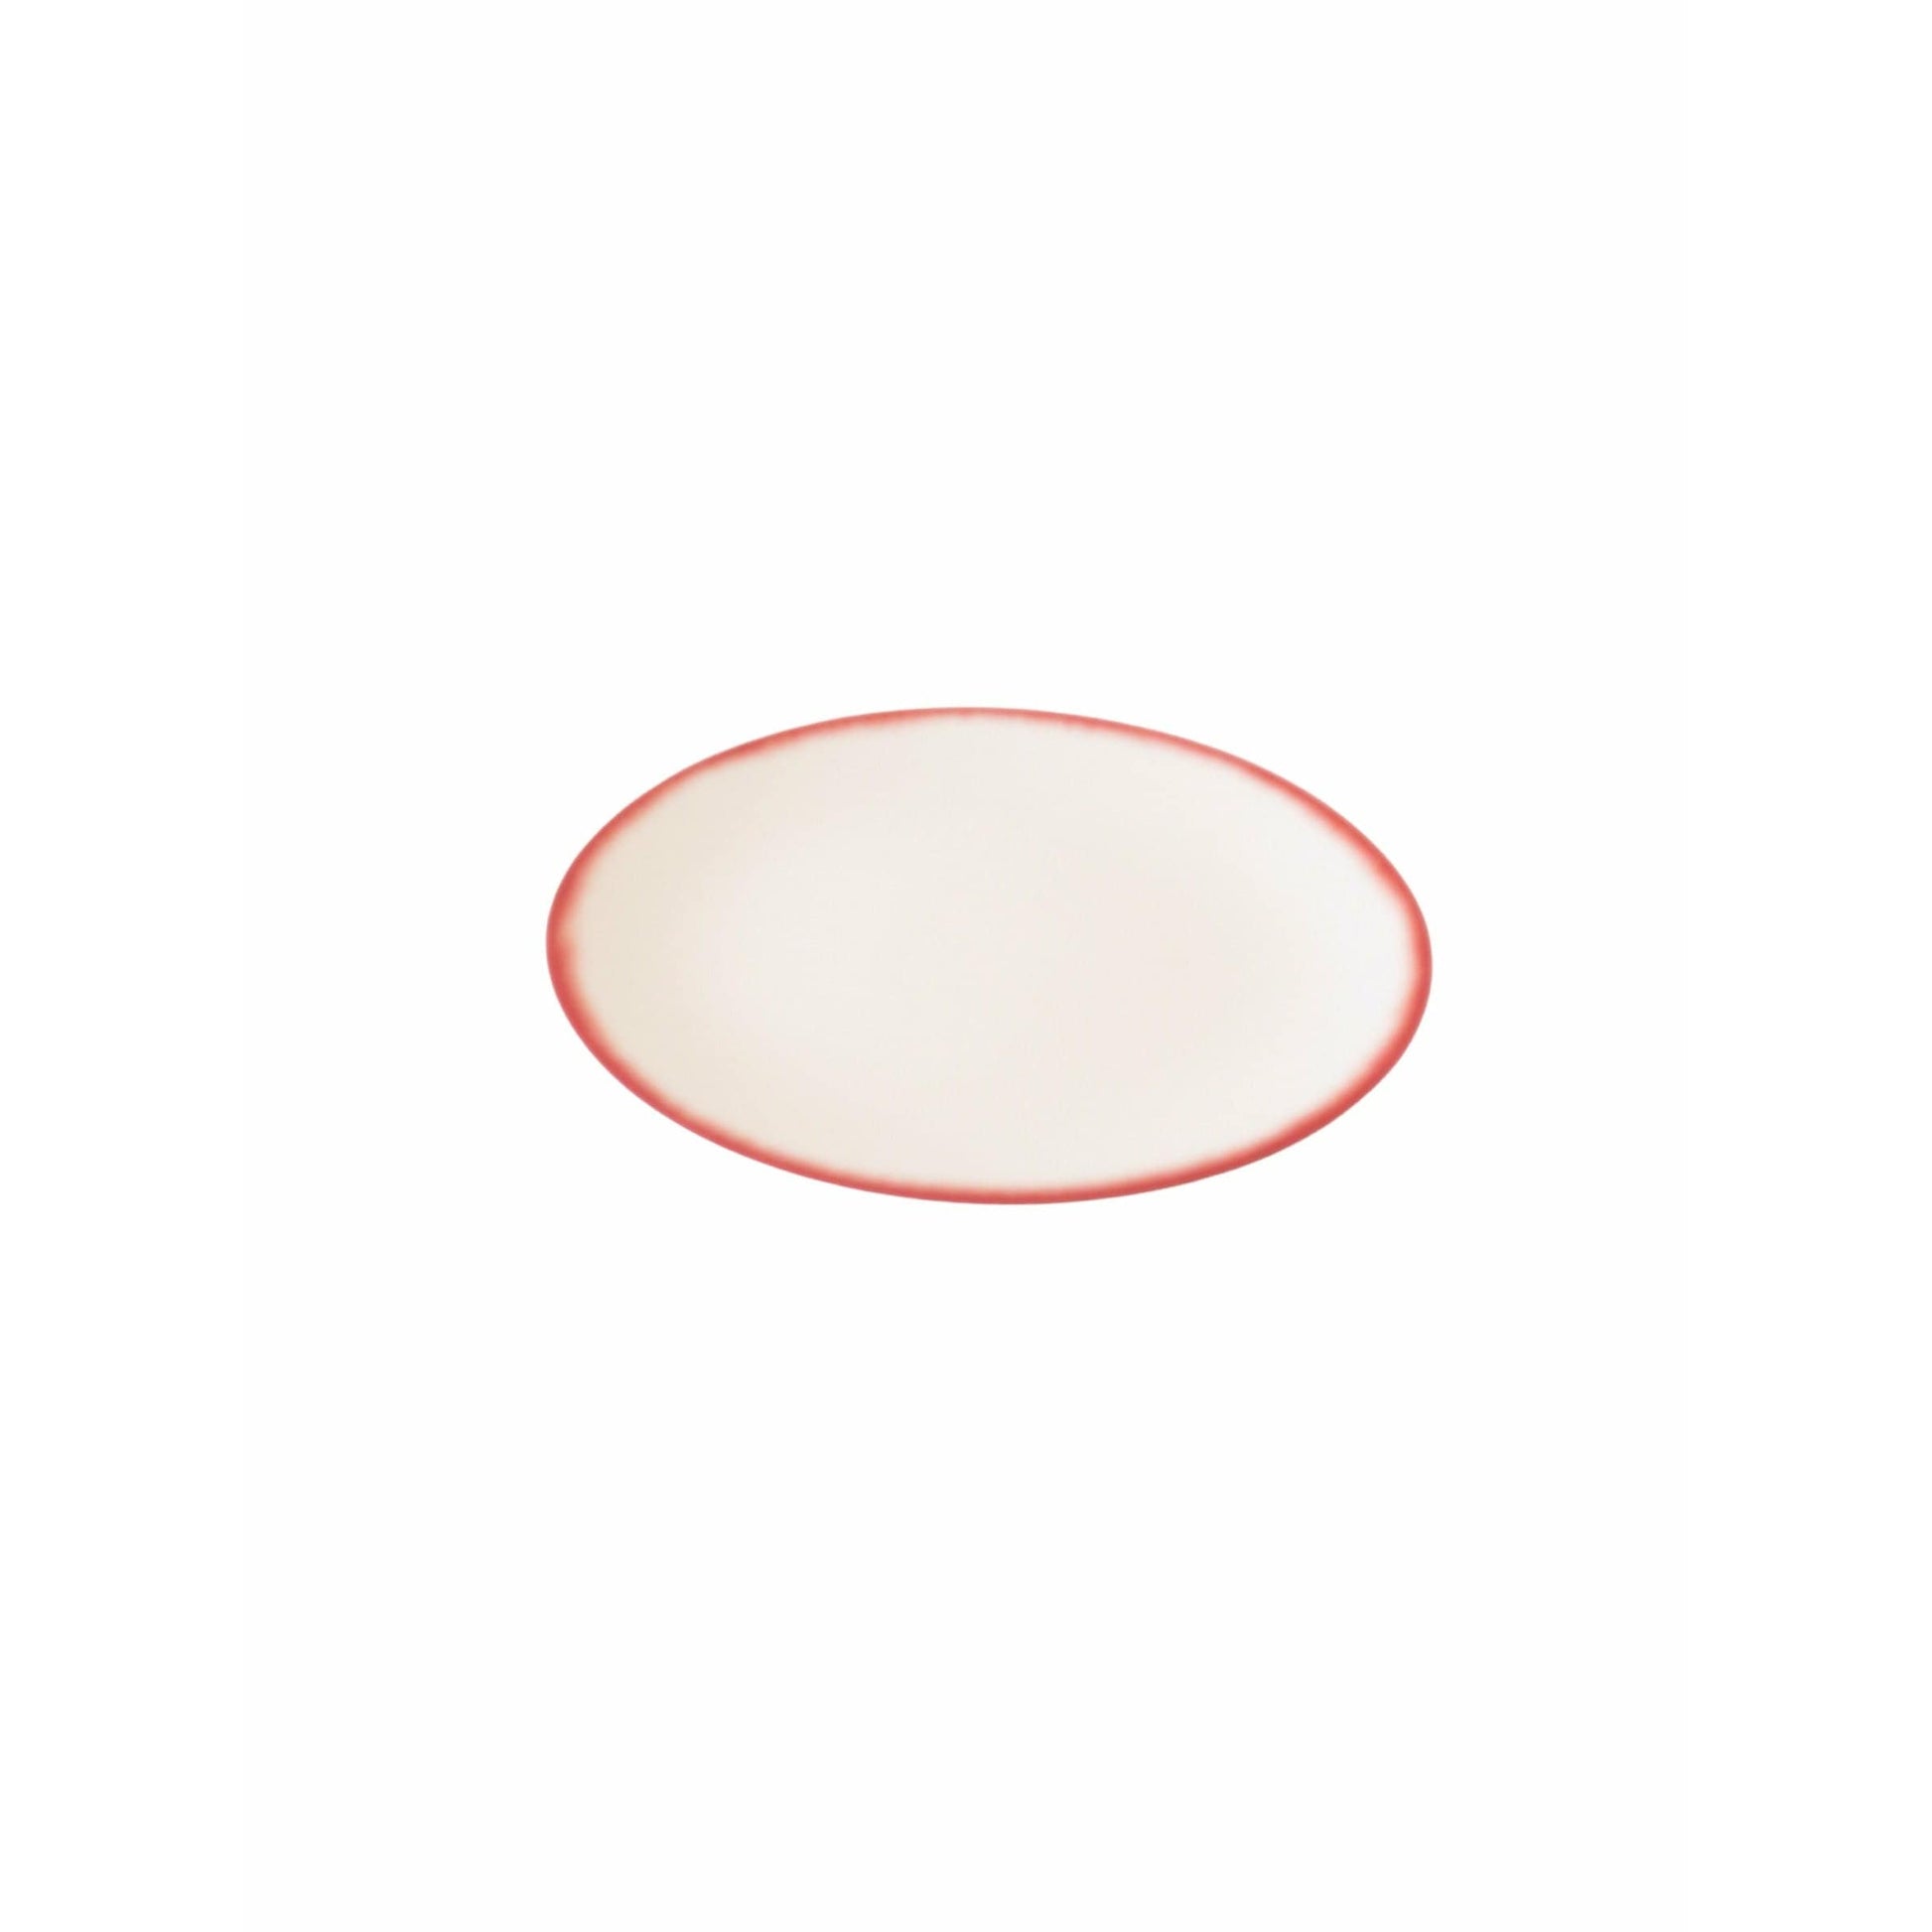 Ann Demeulemeester Home Plate 28 centimeters / Off-white & red / Porcelain Ann Demeulemeester for Serax 28 cm plates (set of two)